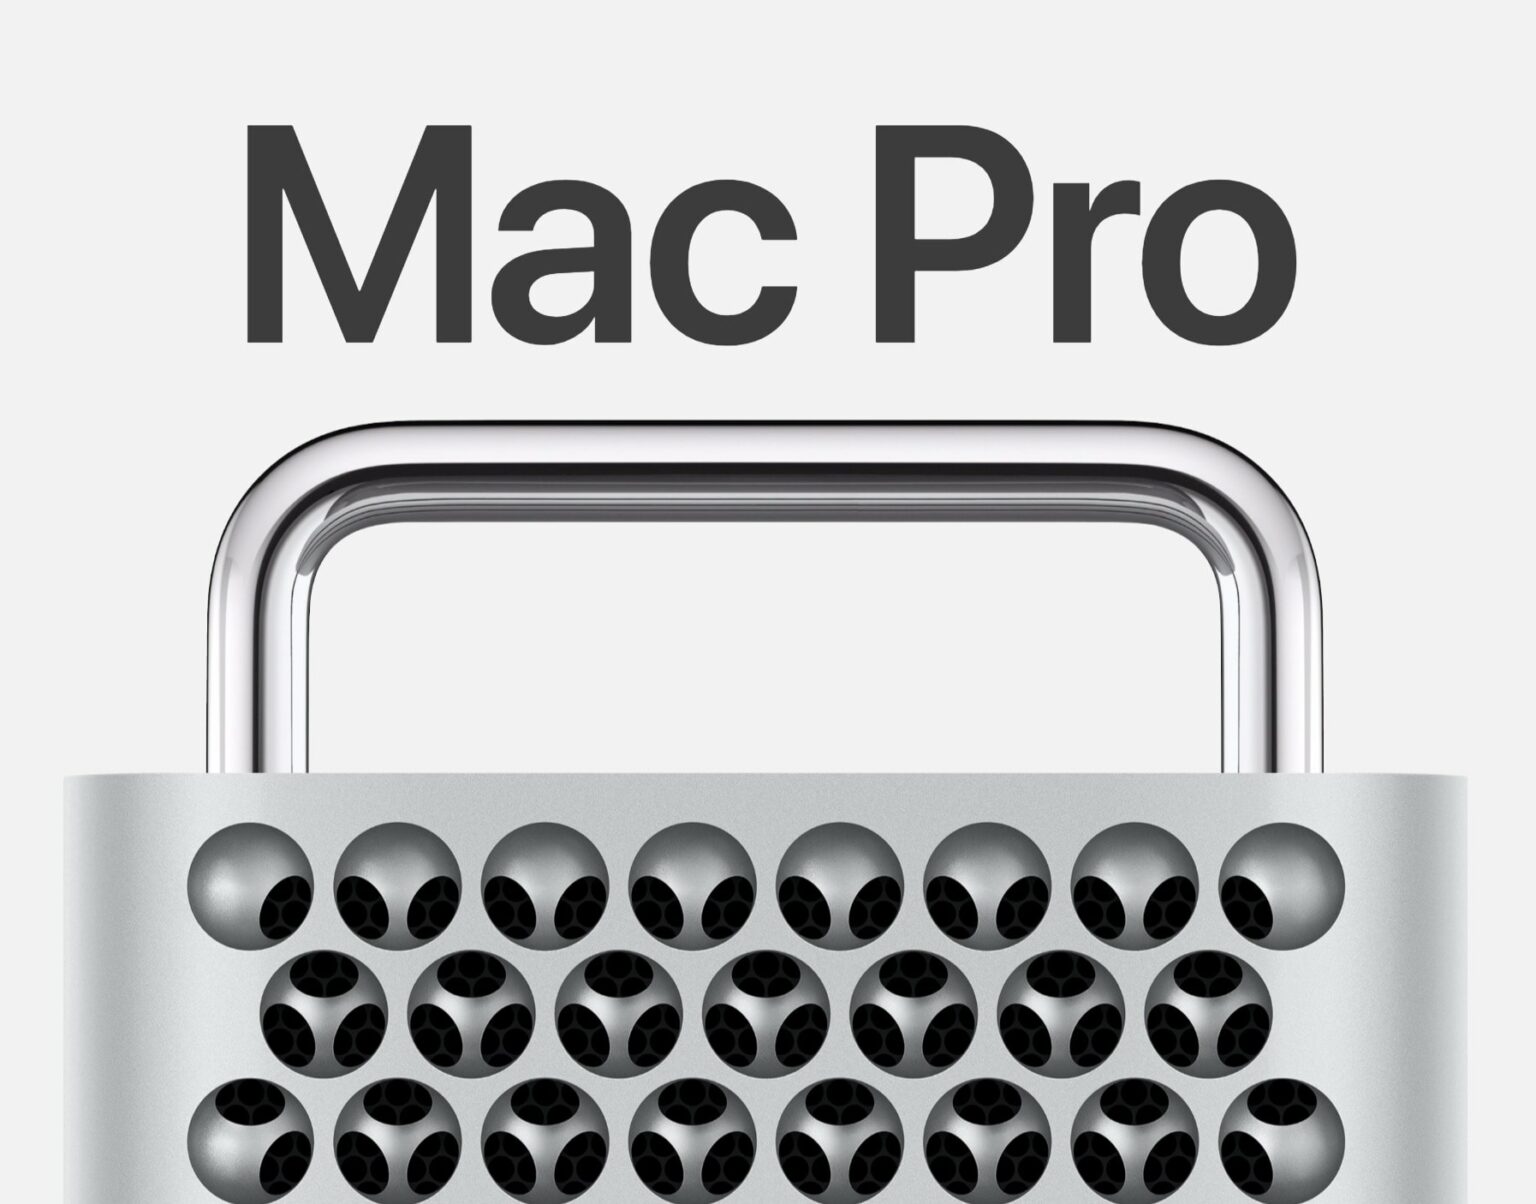 AMD's latest GPU can boost your Mac Pro's graphics performance.